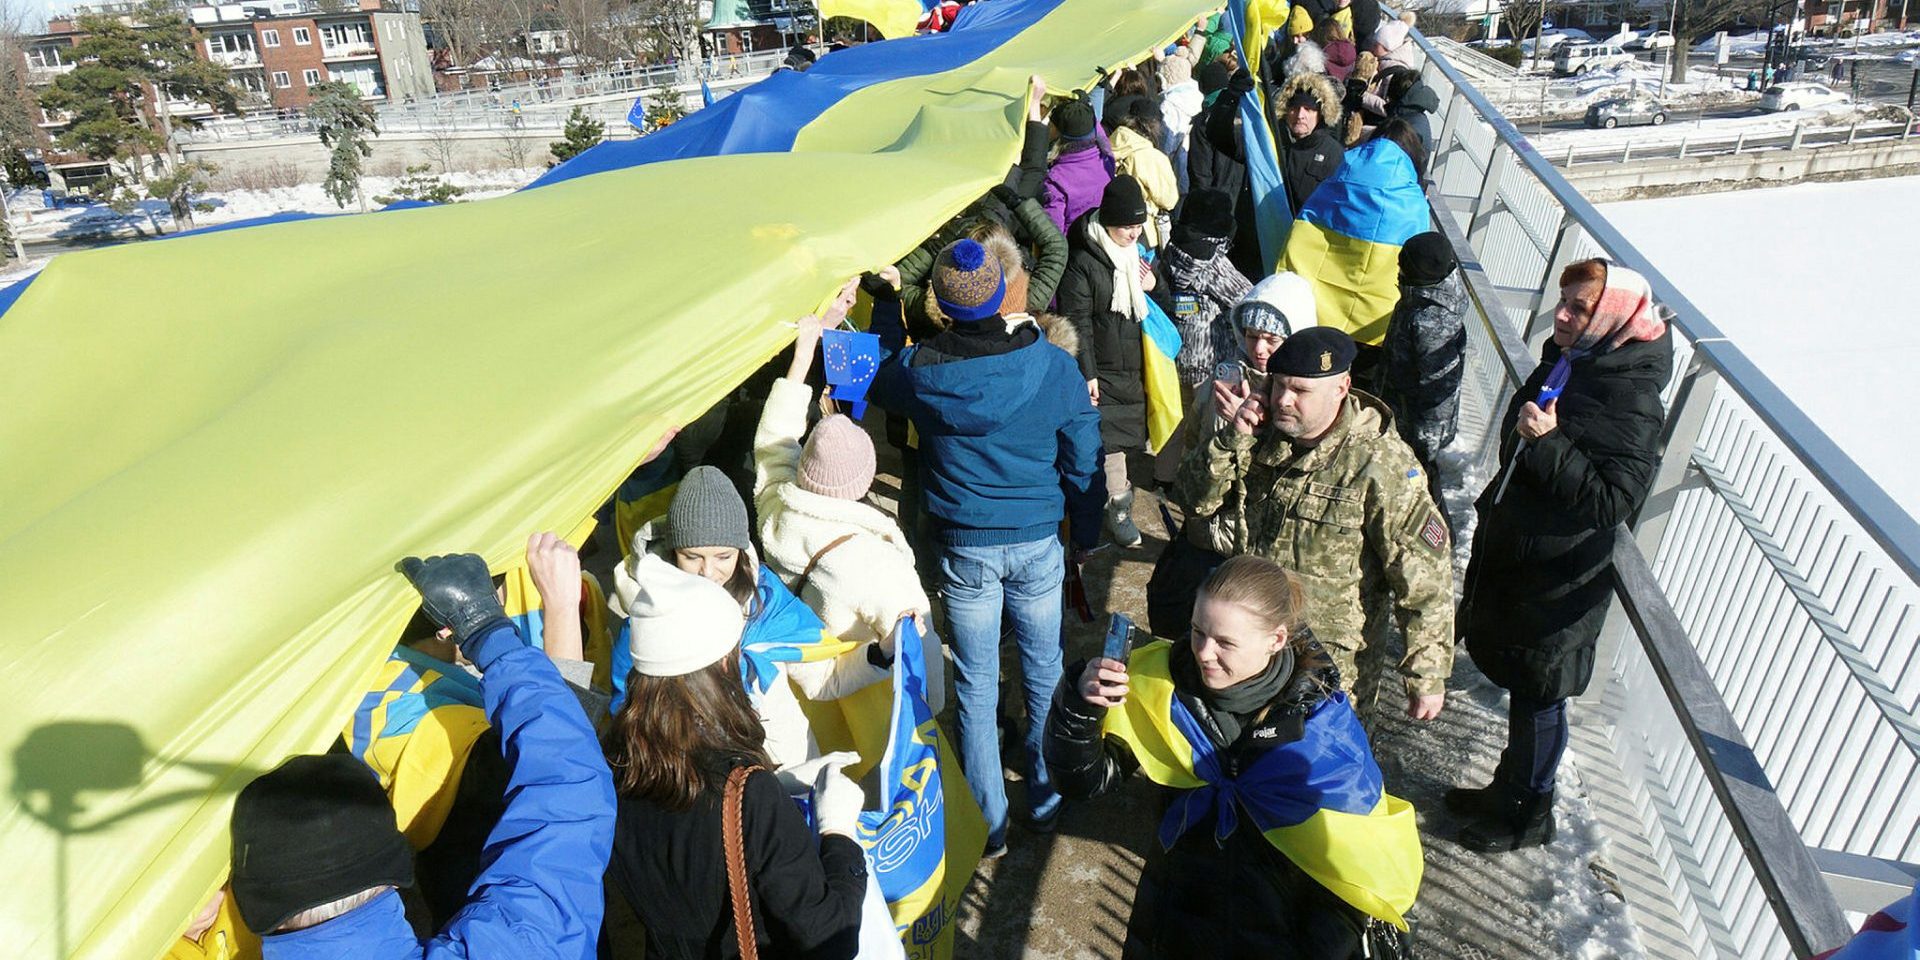 The Flora Footbridge was filled with supporters for the Stand With Ukraine rally on Feb. 20 The Hill Times photograph by Sam Garcia